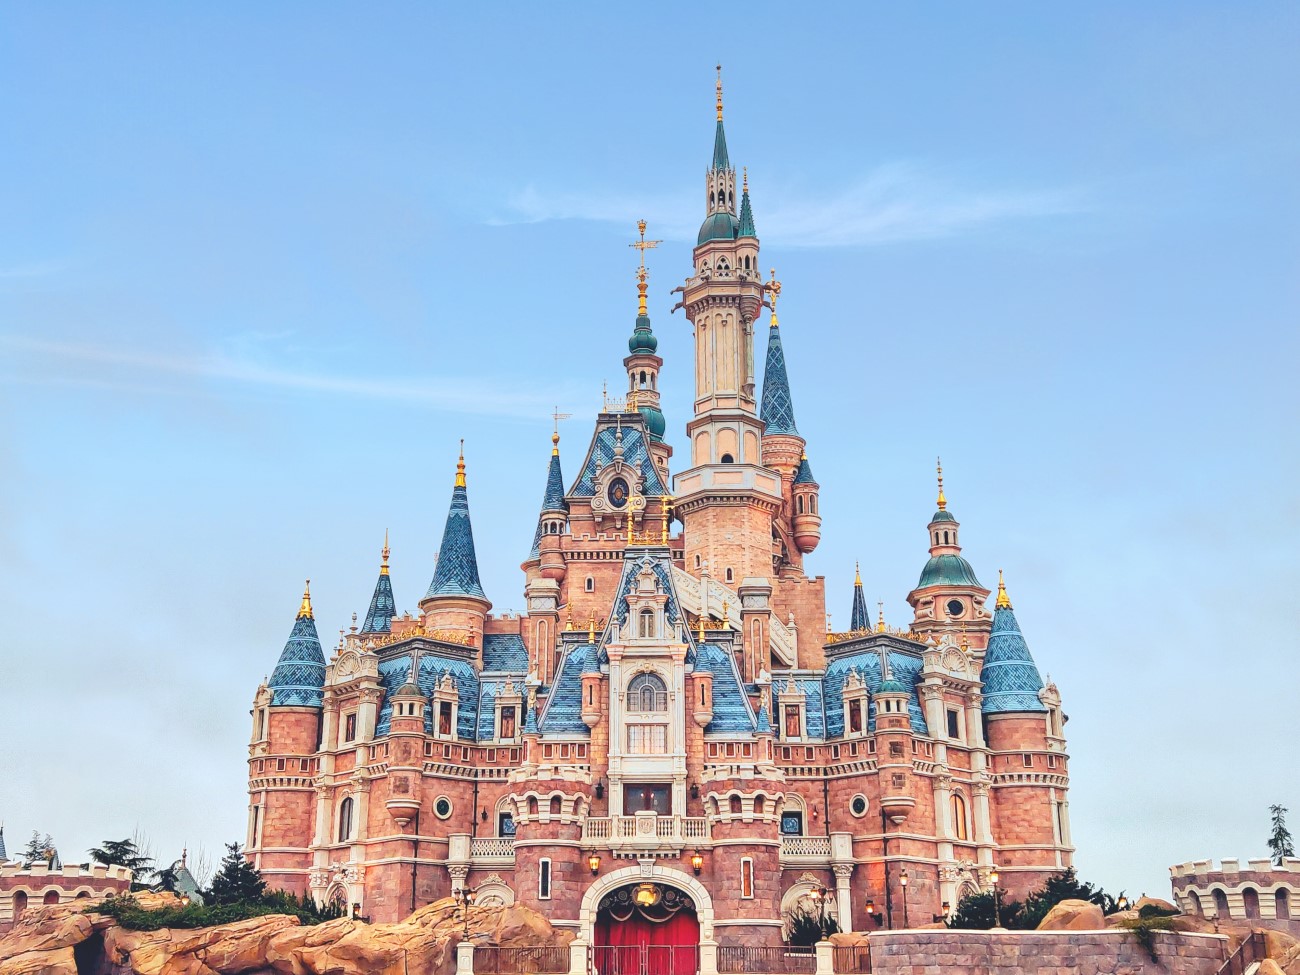 A photo of a fantastical castle in Disneyland intended to prompt memories of your family vacations.